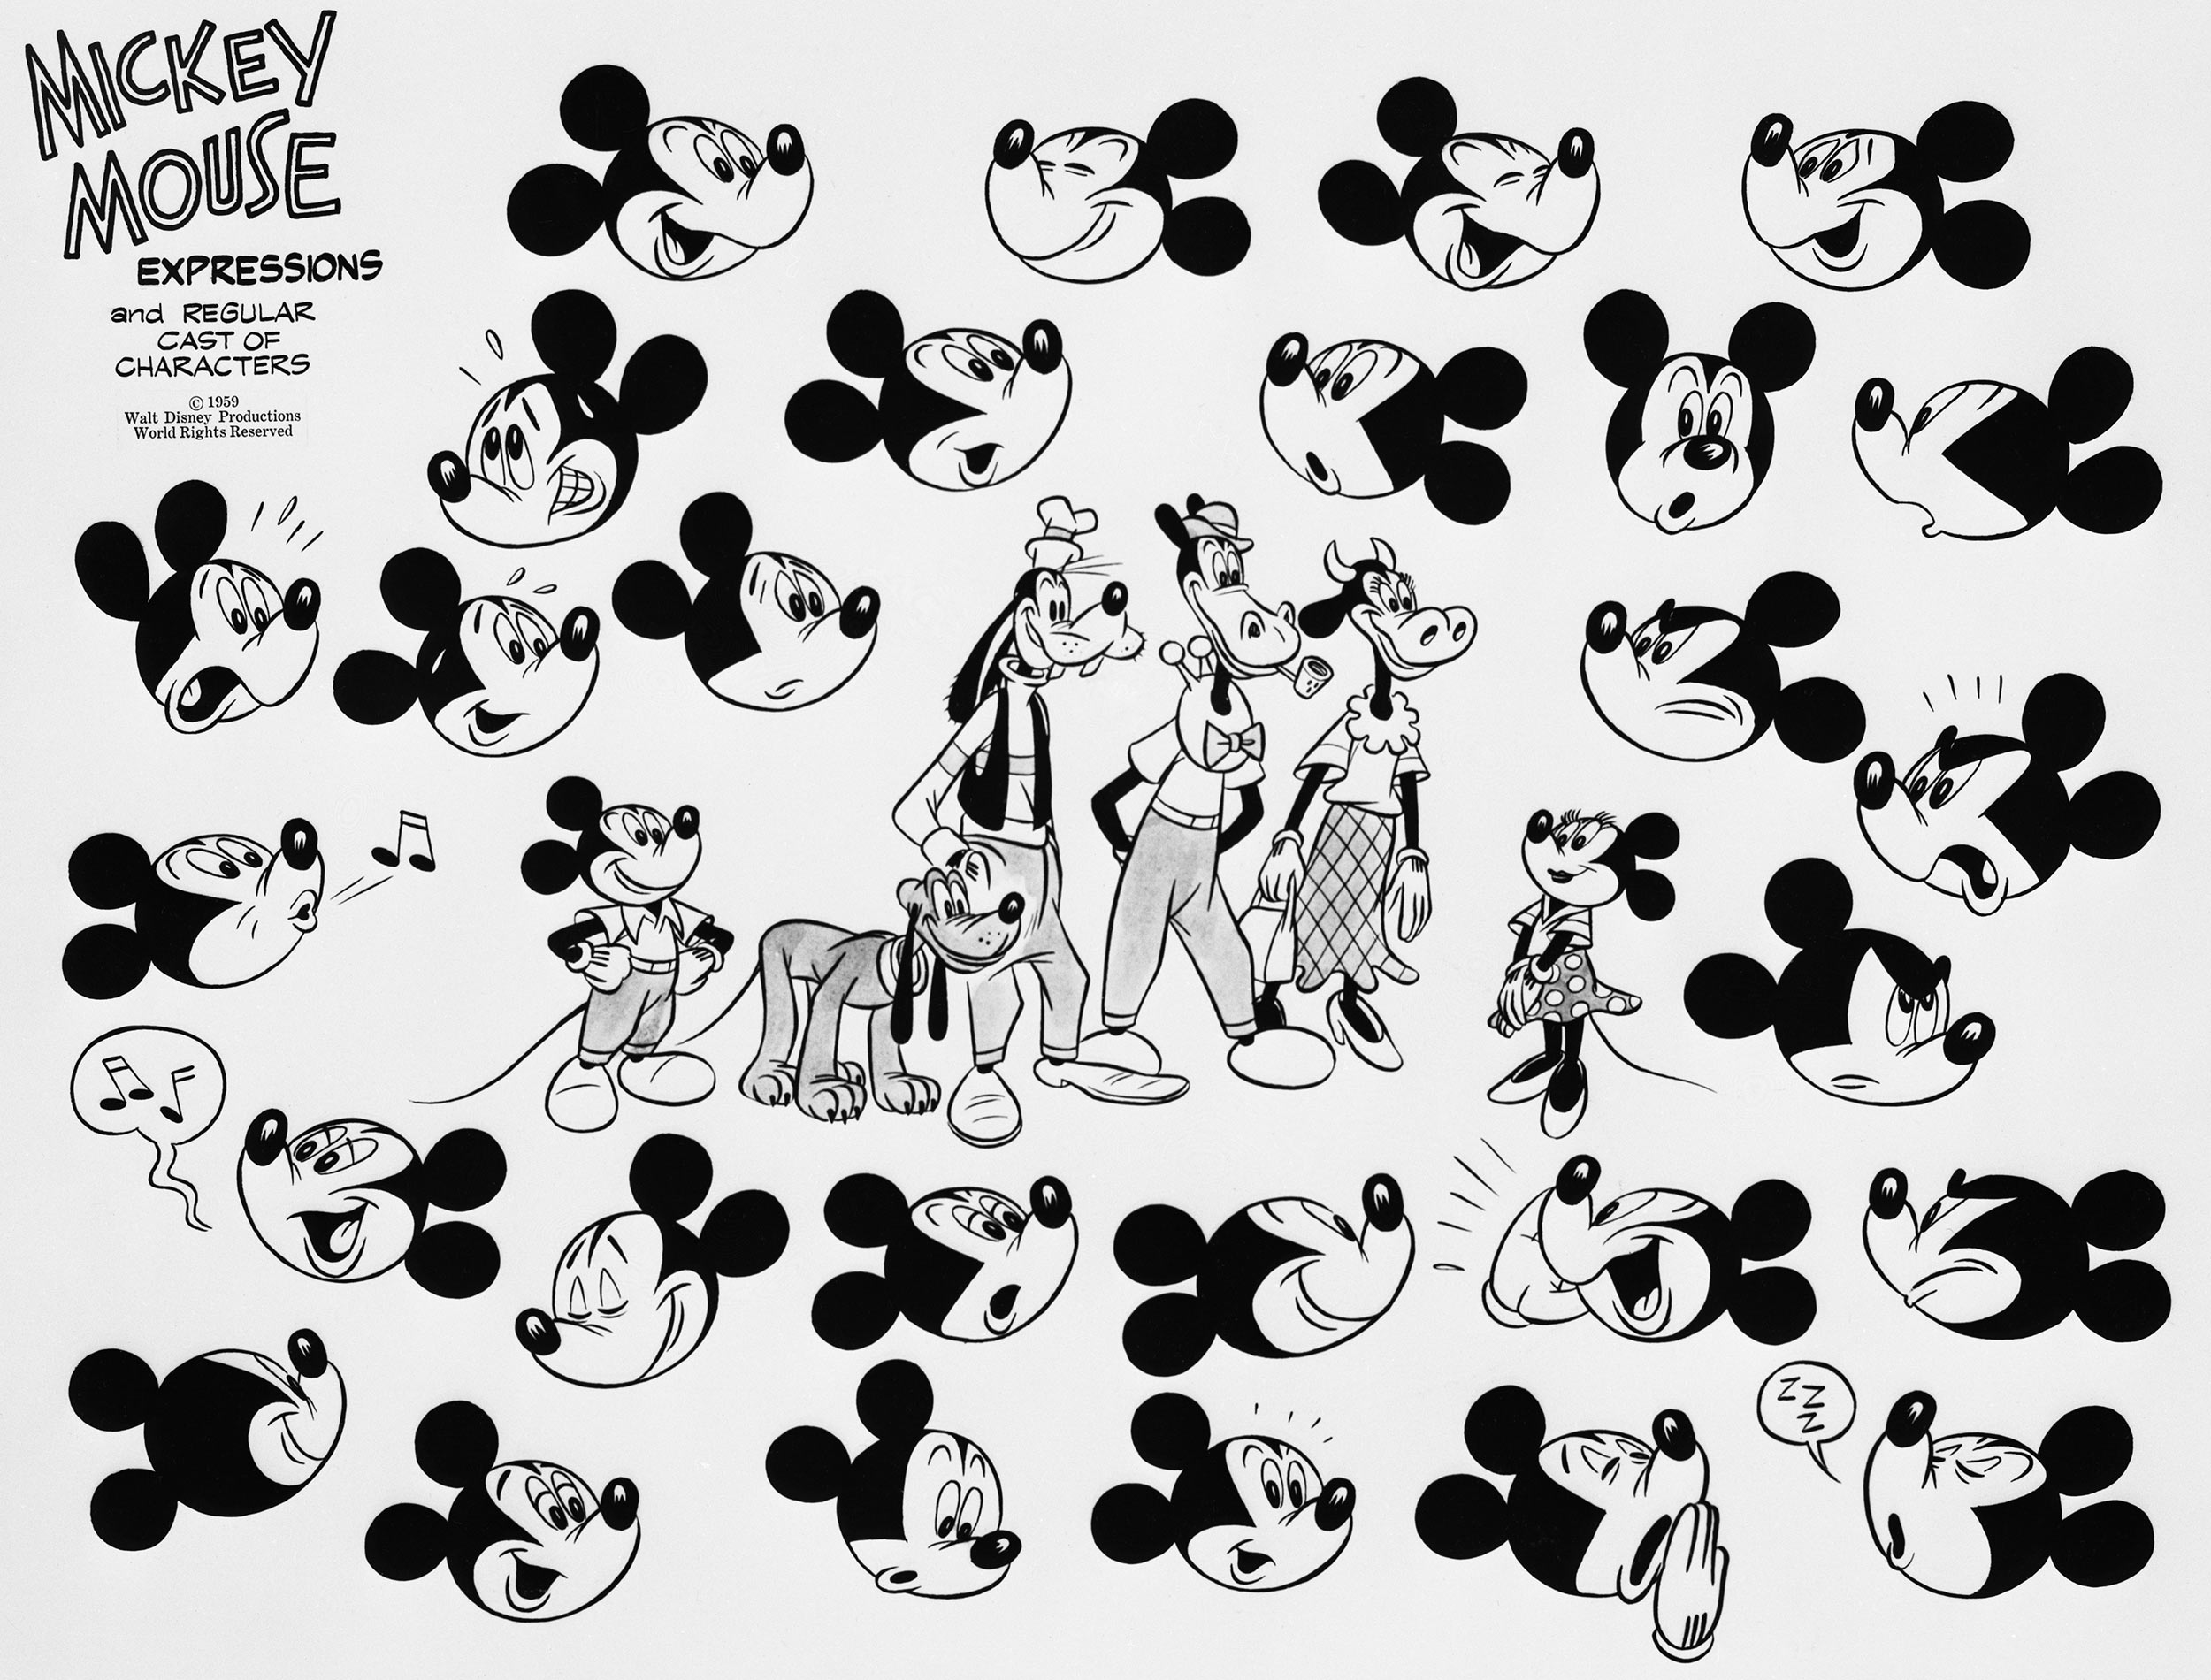 Mickey Mouse model sheet for publications, 1959. Collection of Andreas Deja.